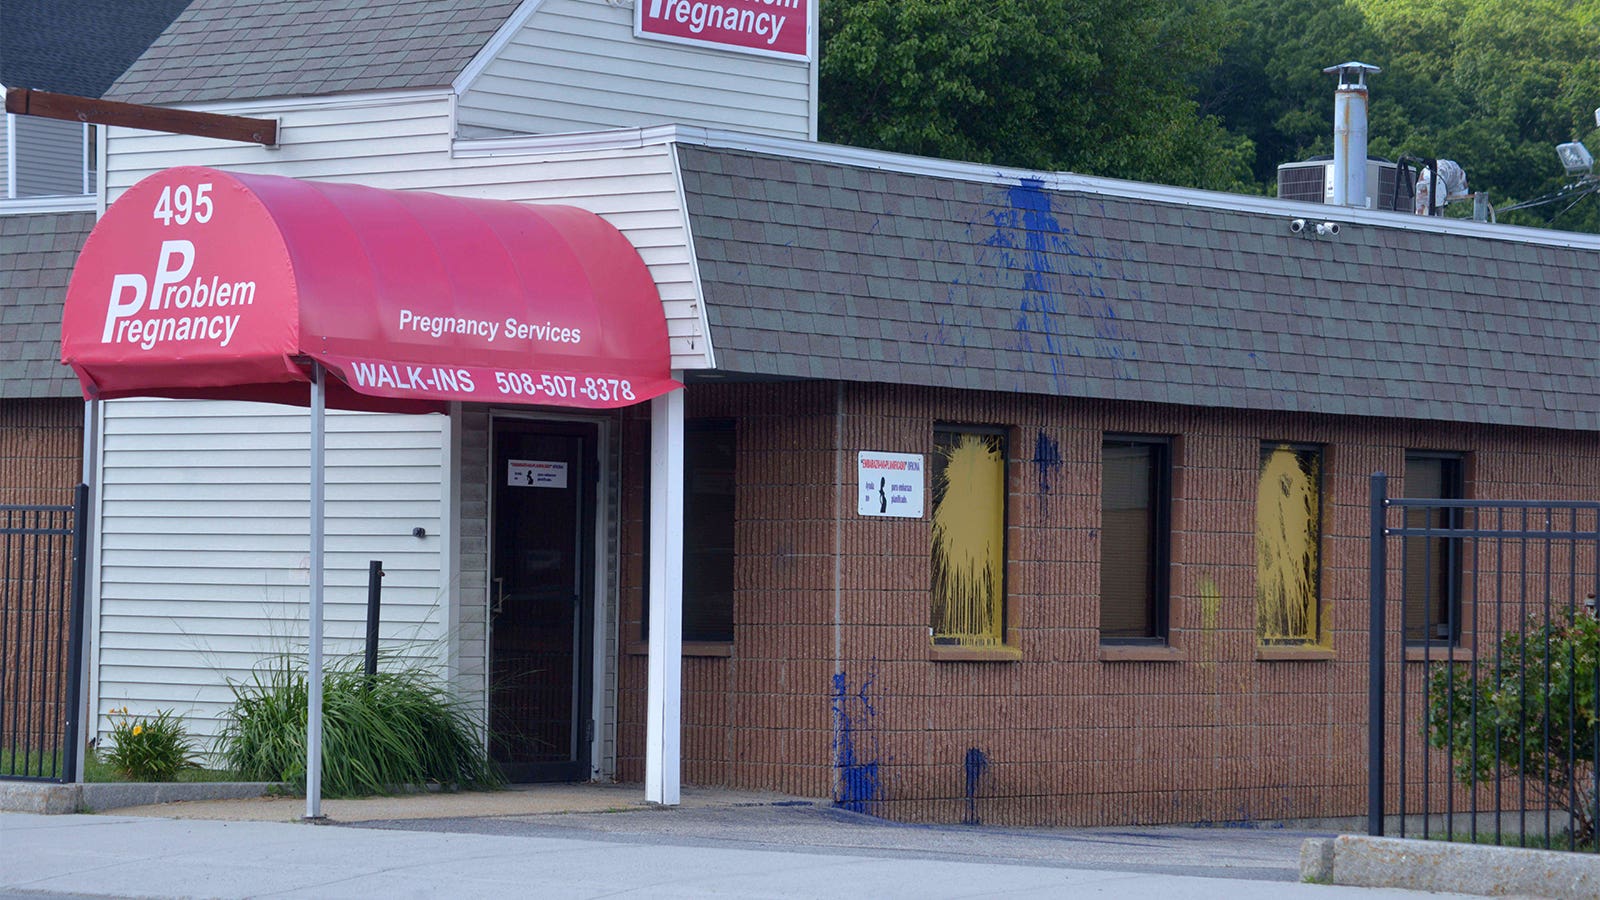 How to Spot Anti-Abortion ‘Crisis Pregnancy’ Centers